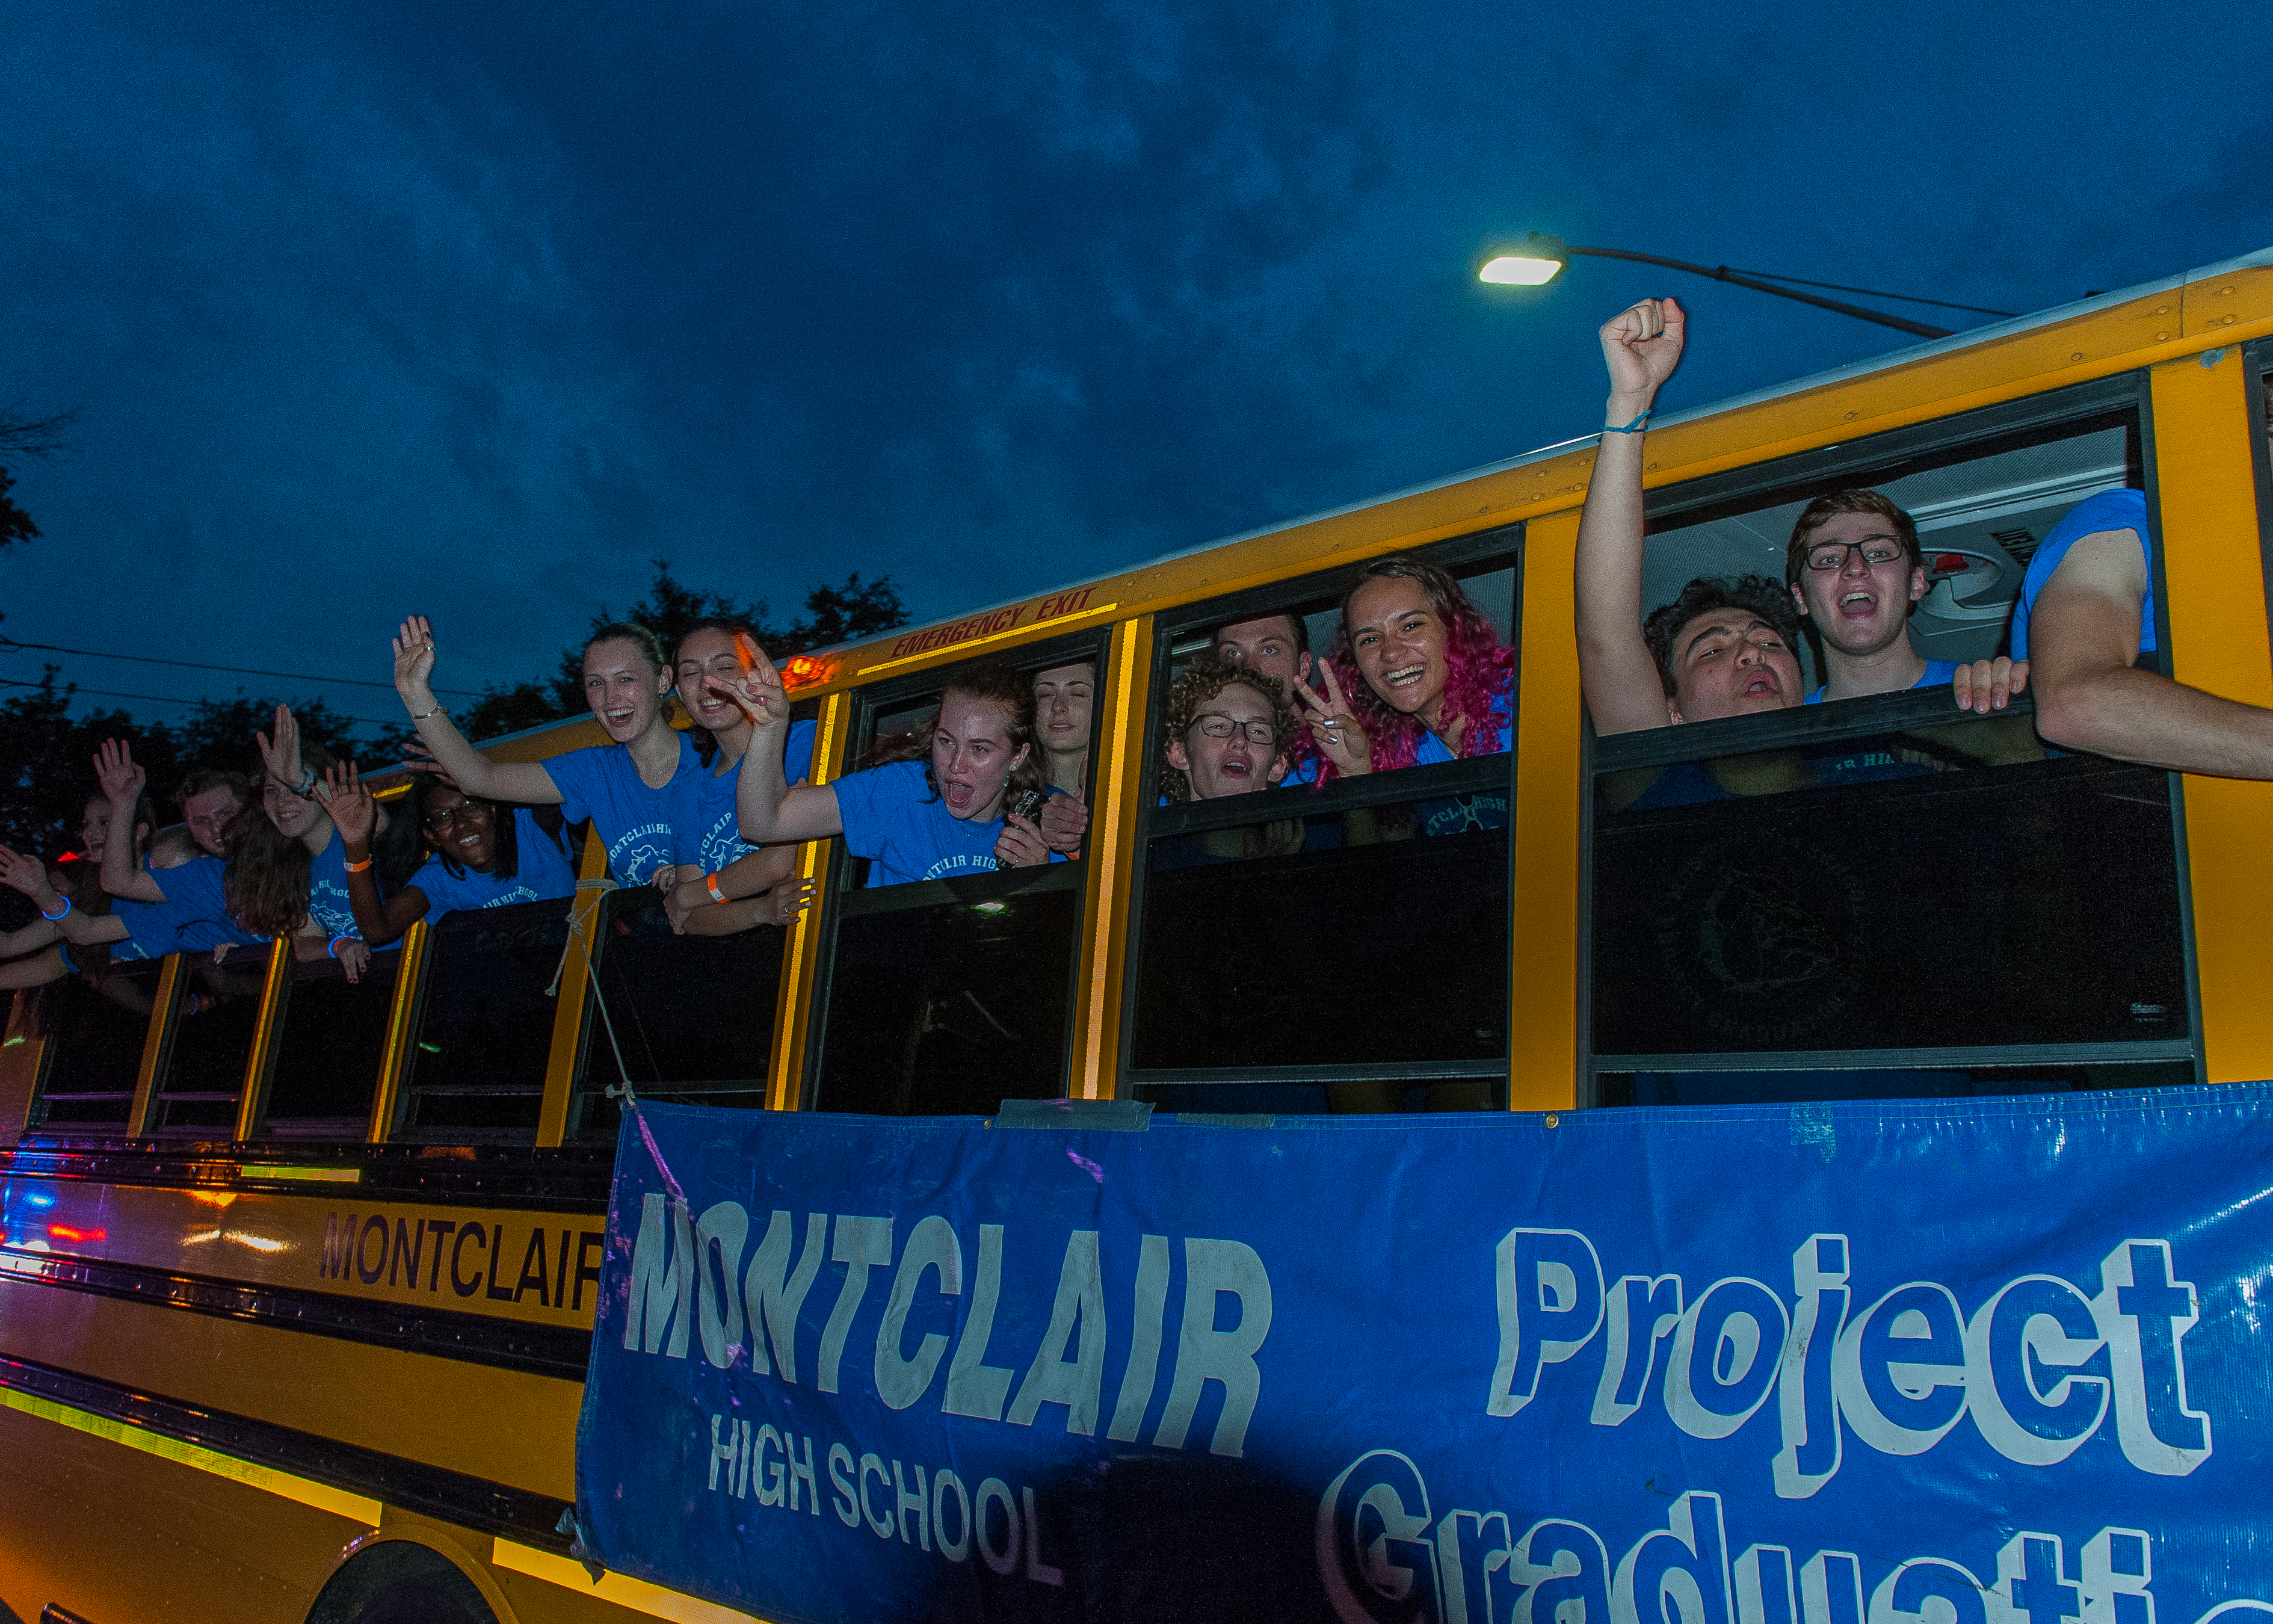 Students riding school busses through Watchung Plaza on their way to Project Graduation. Photo by Scott Kennedy for The Montclair Dispatch.